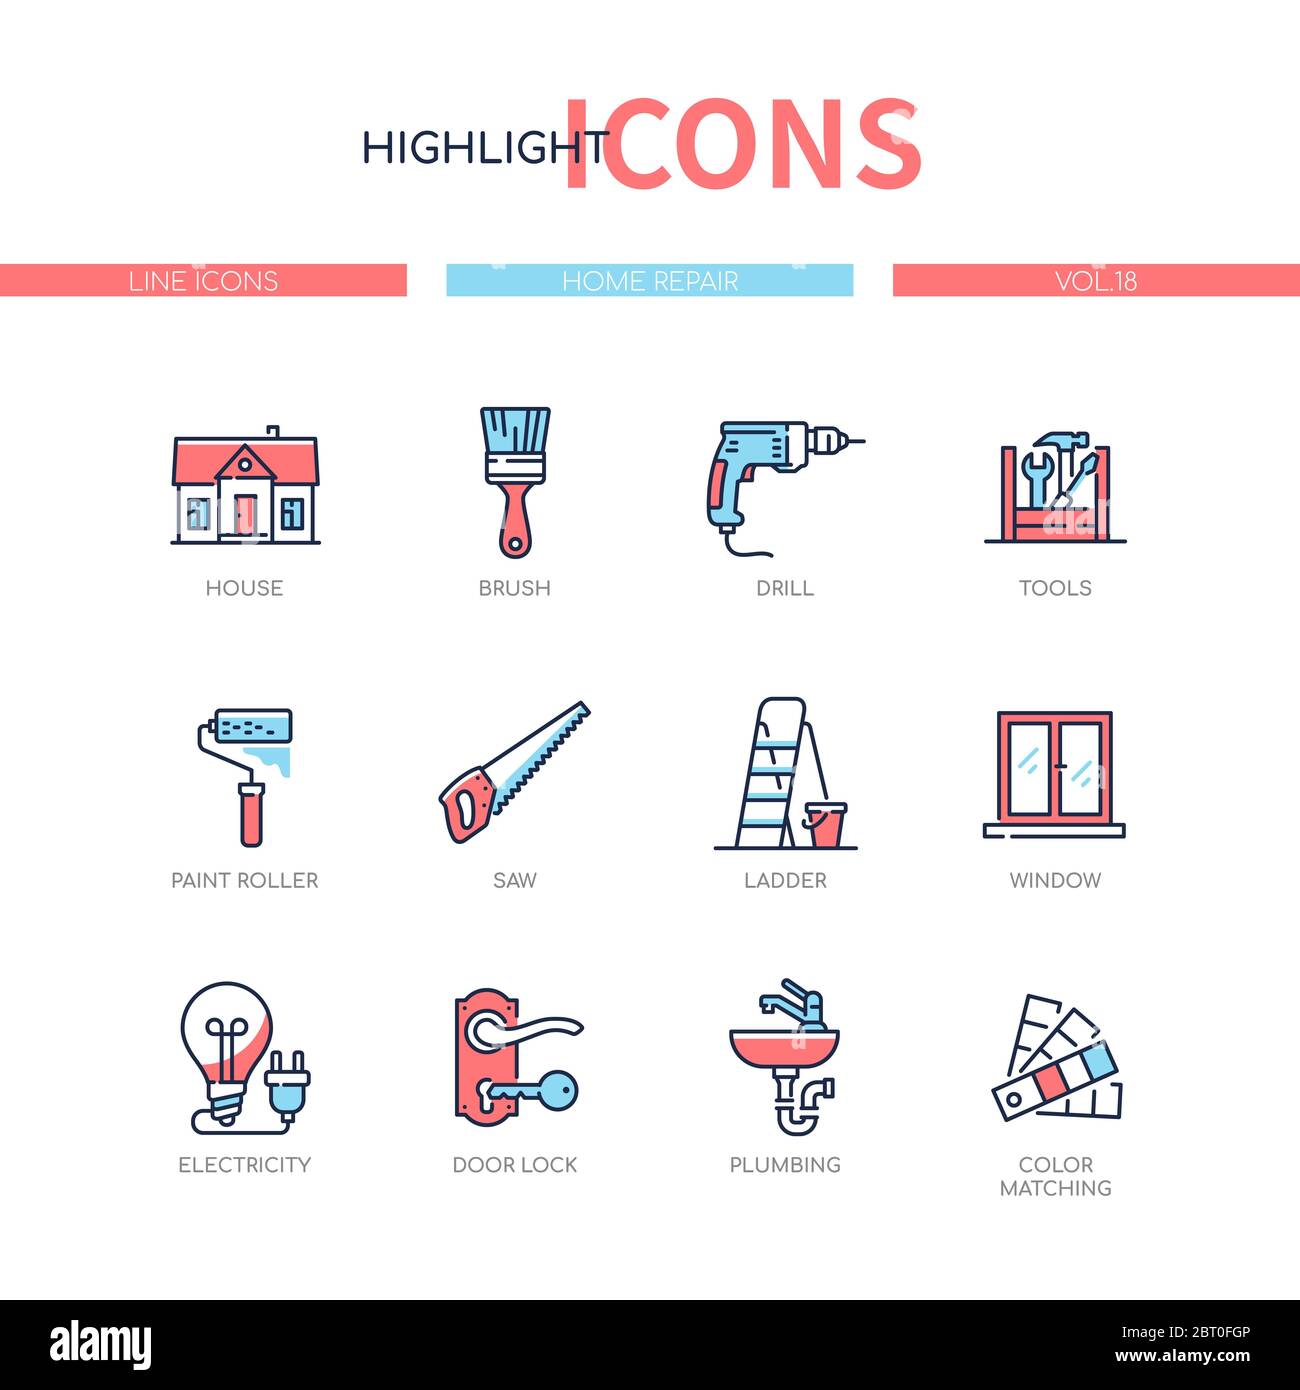 Home repair - line design style icons set Stock Vector